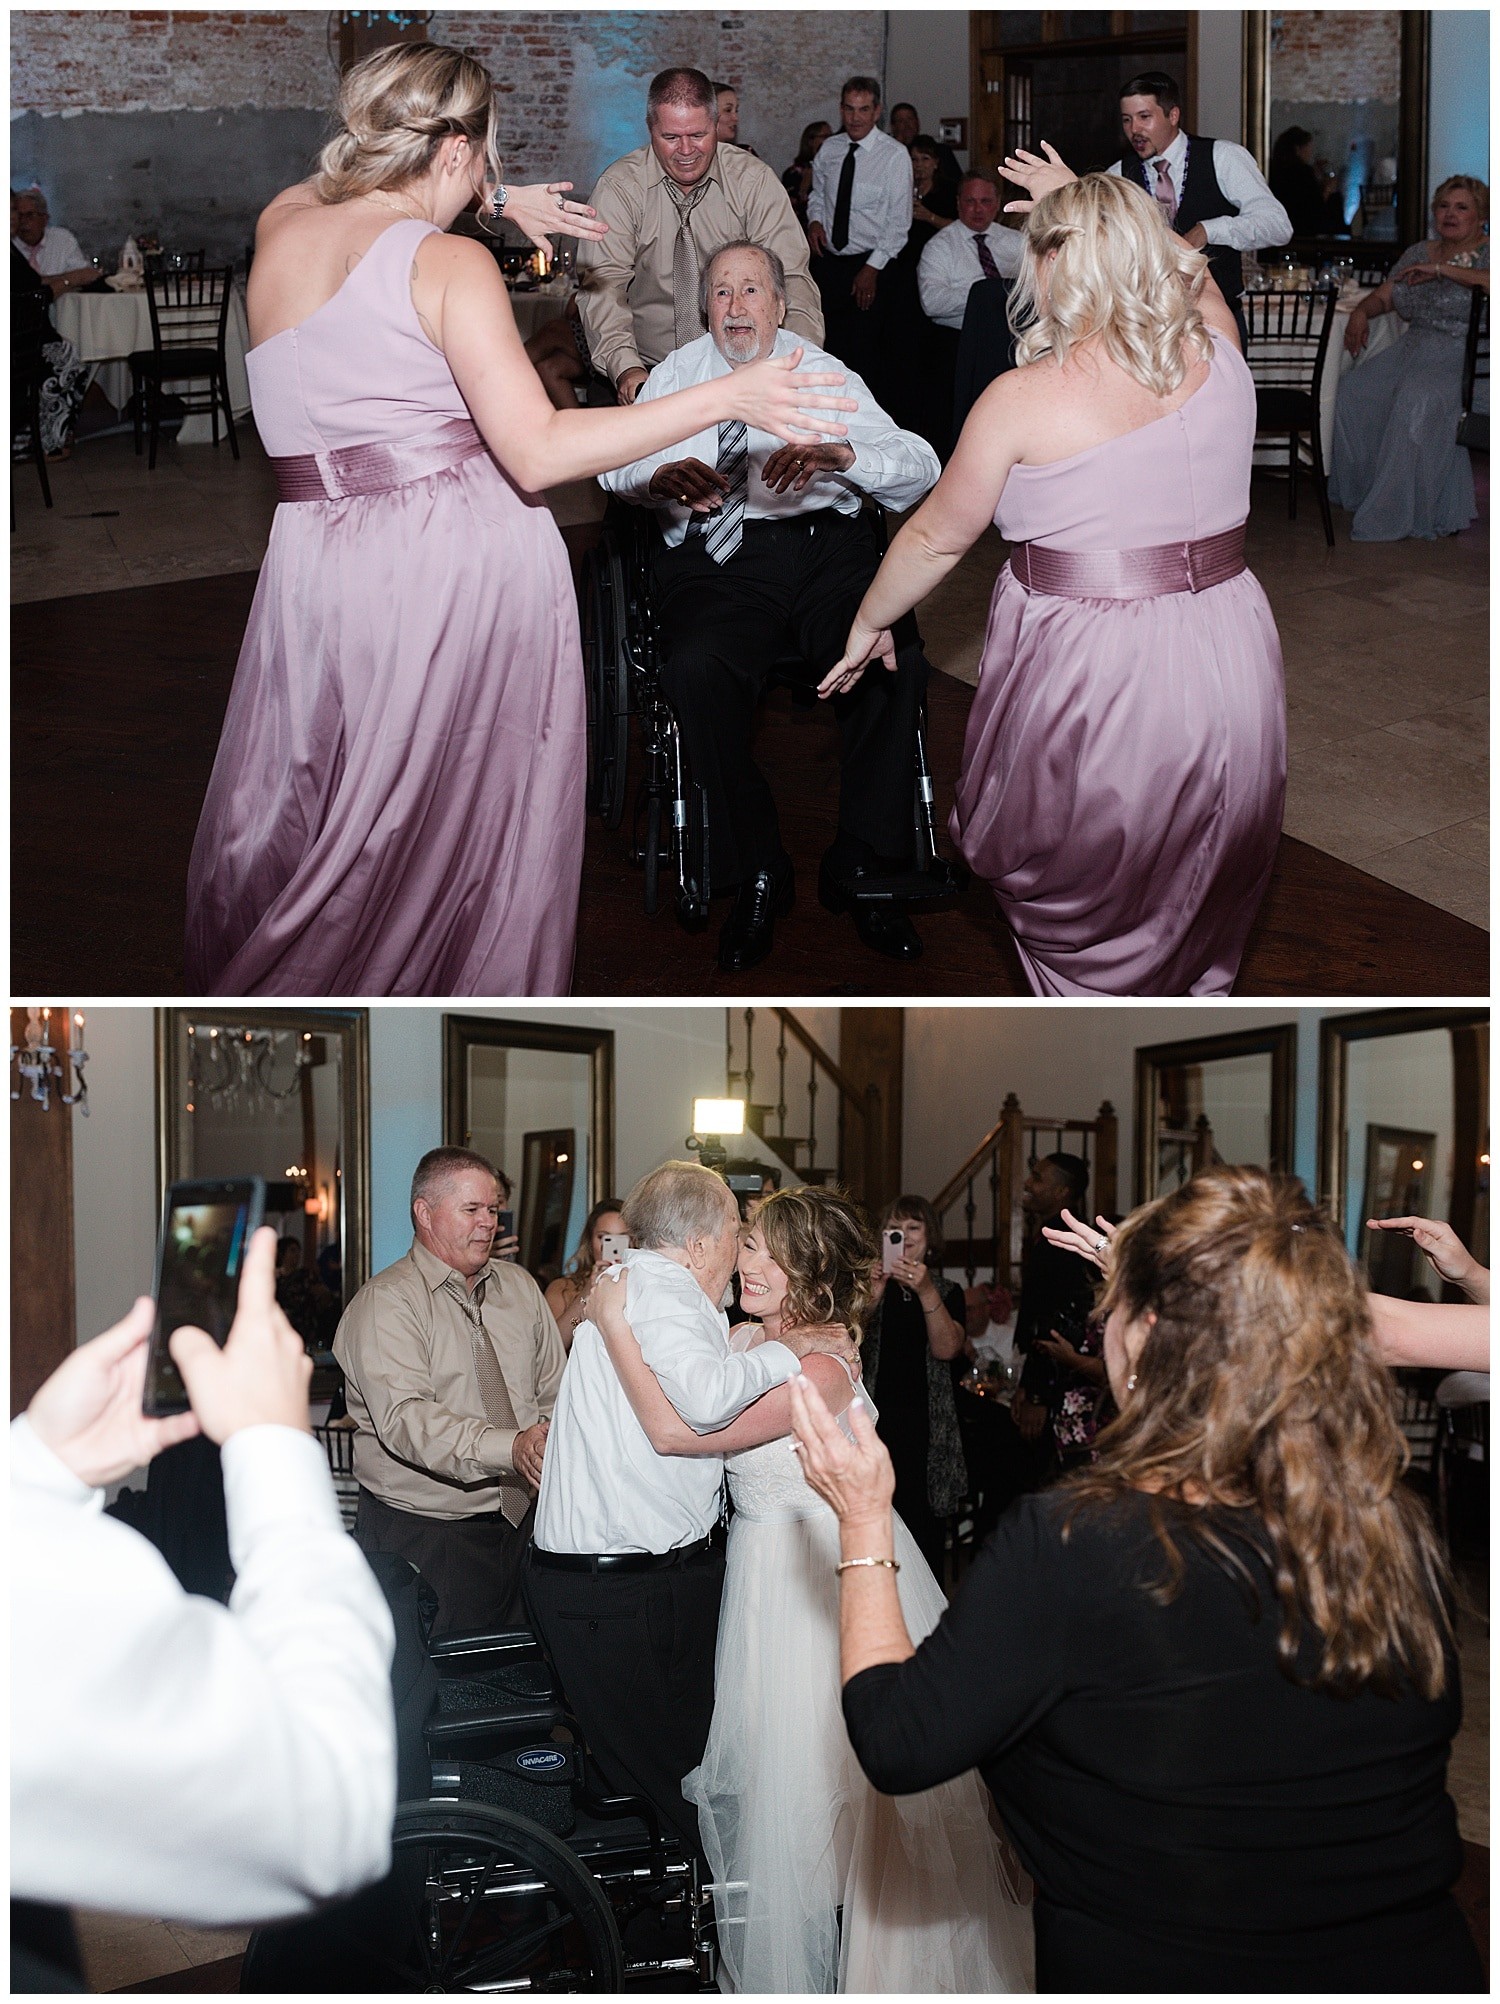 wedding reception dancing at Thomas Bistro in New Orleans by Swish and Click Photography